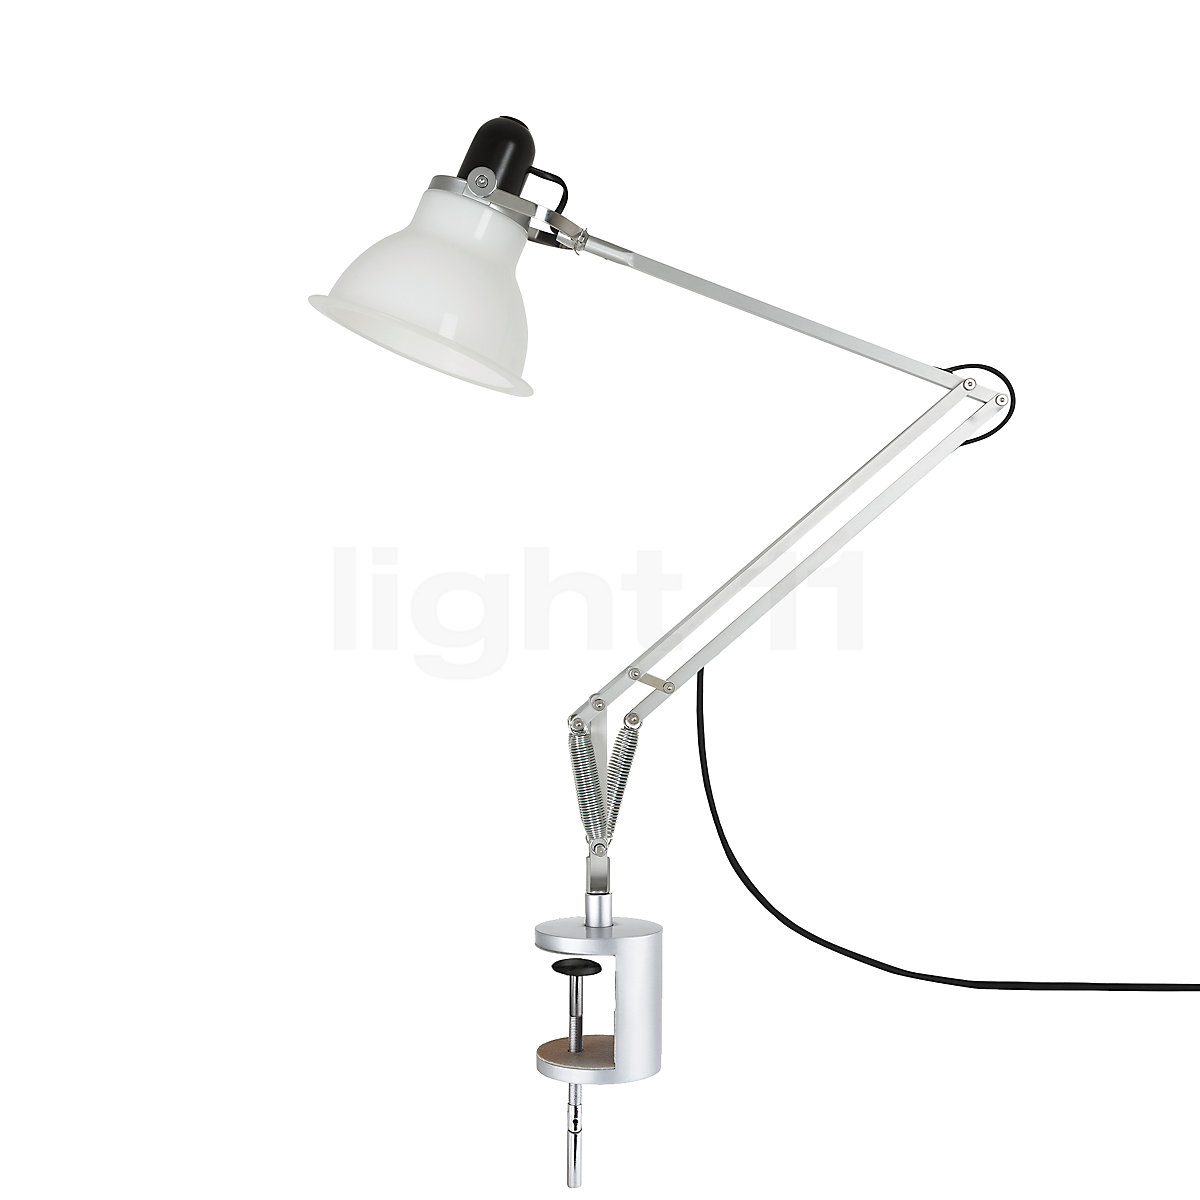 Buy Anglepoise Type 1228 Desk Lamp With Clamp At Light11 Eu